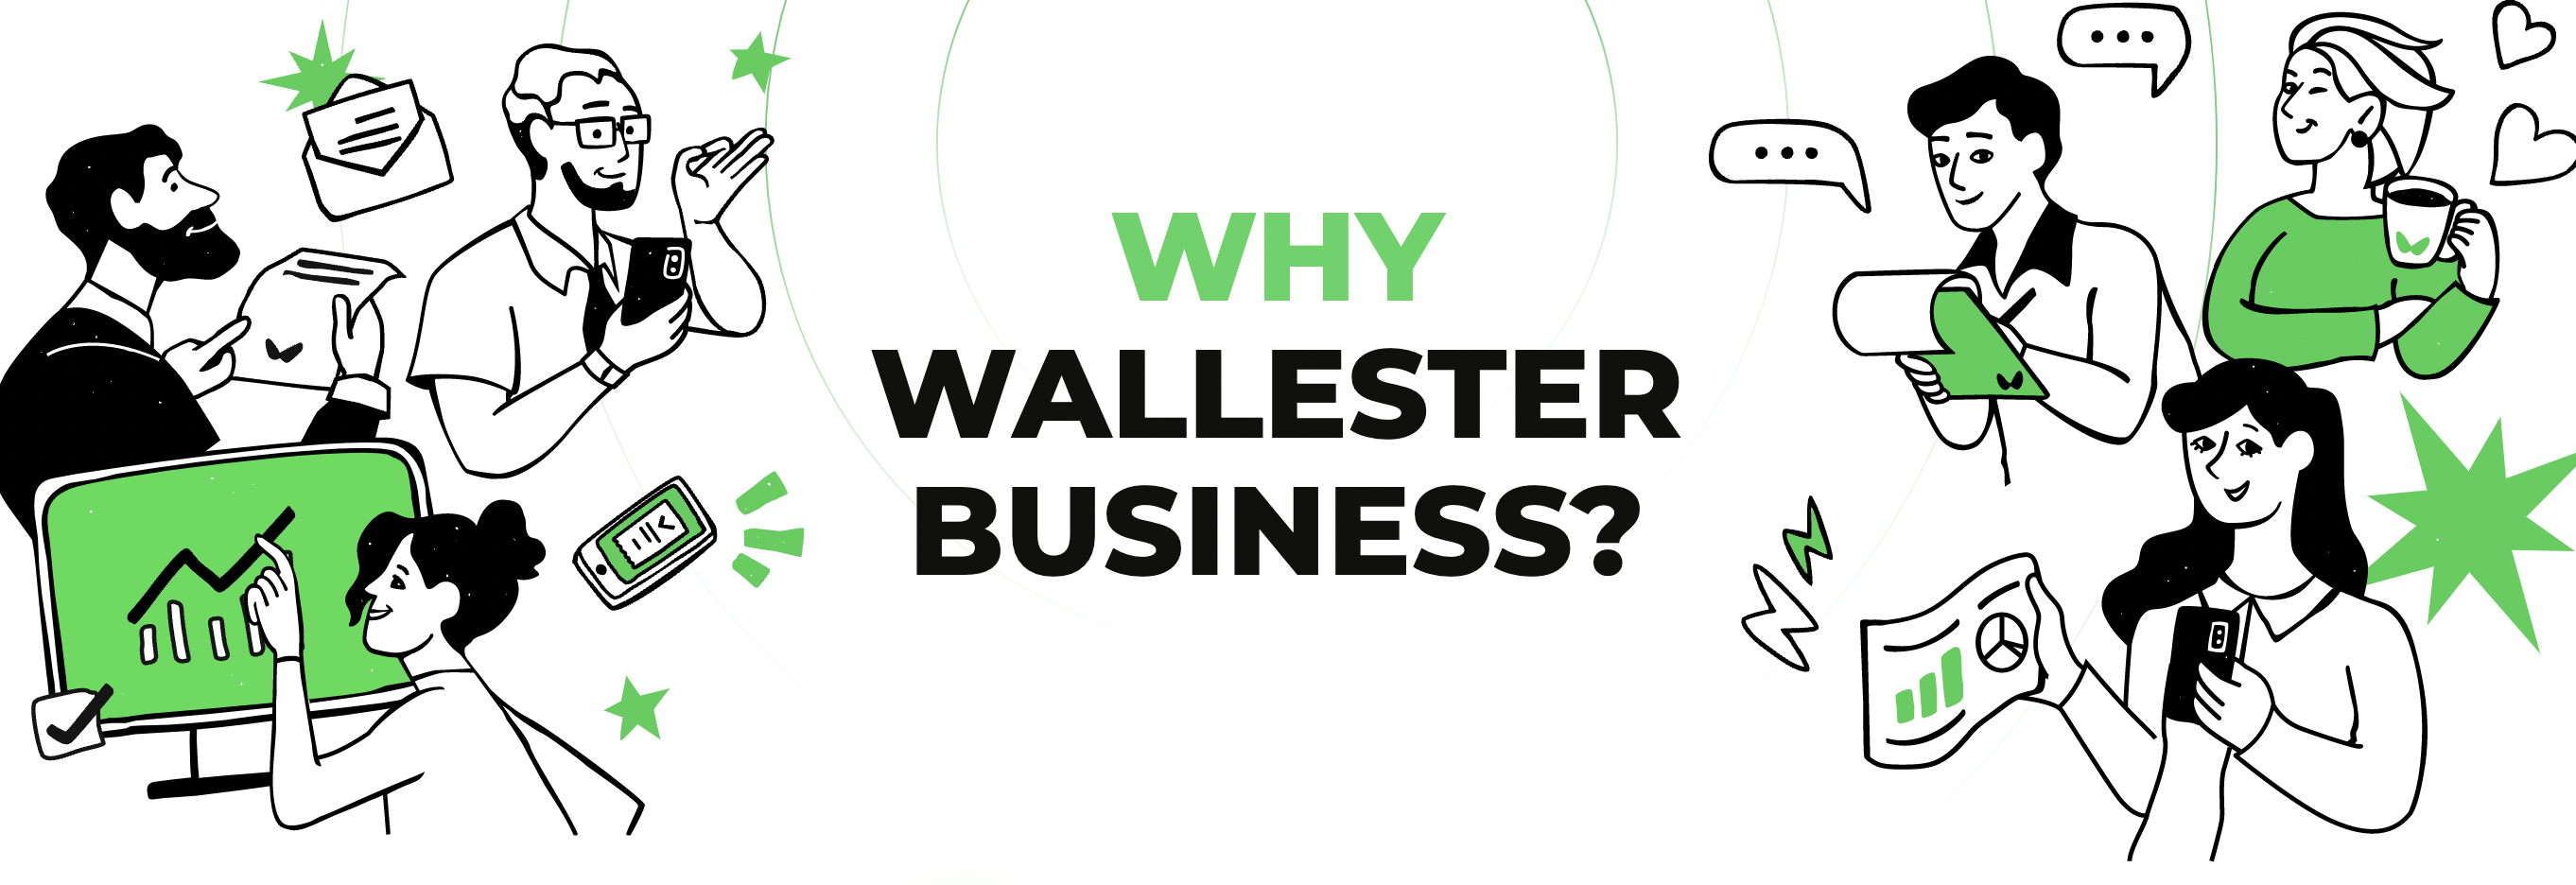 Why Wallester Business?